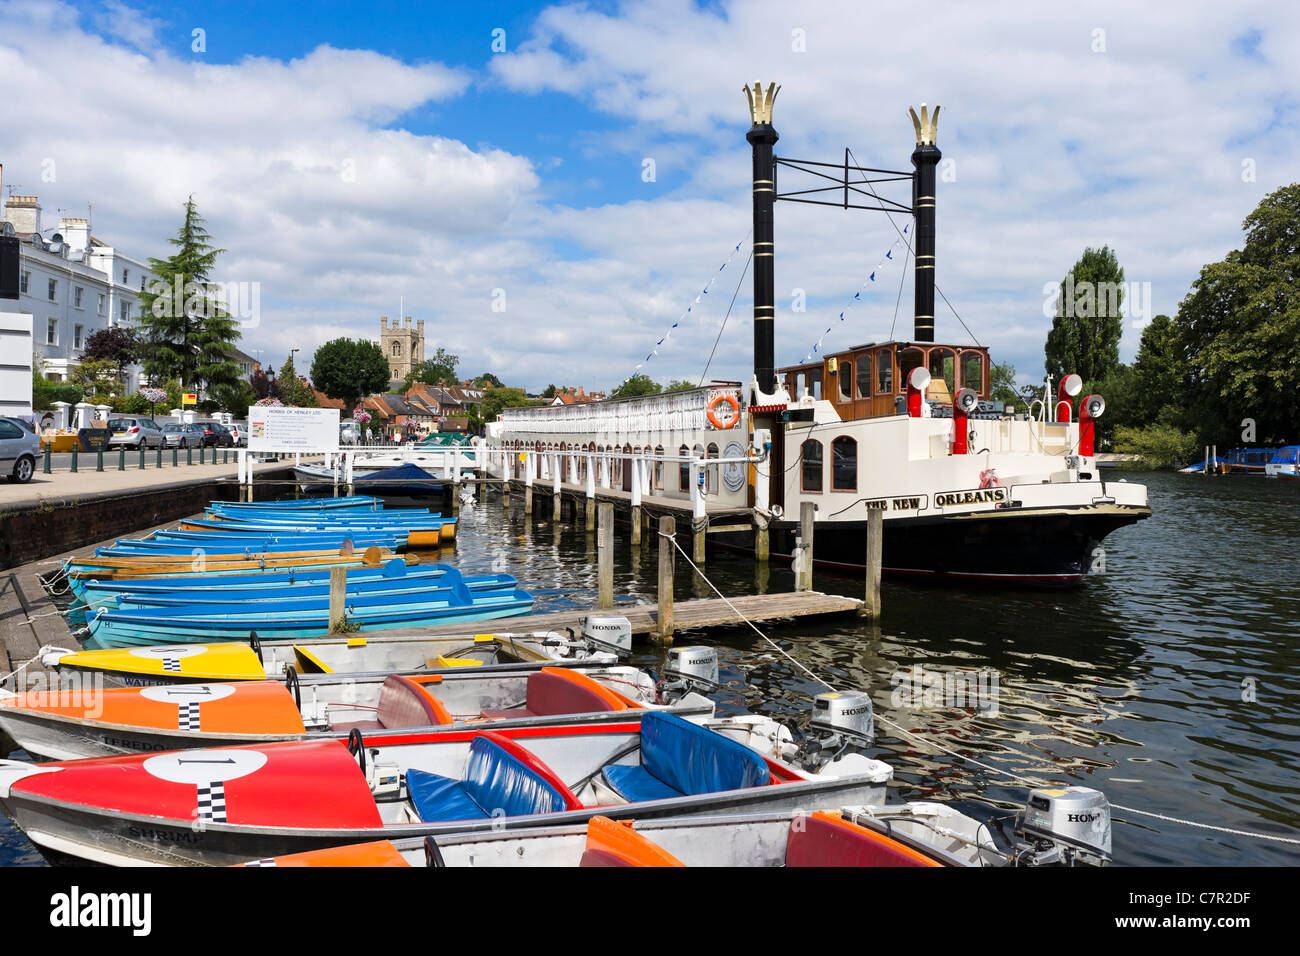 The paddle steamer 'New Orleans' and boats for hire on the River Thames at Henley-on-Thames, Oxfordshire, England, UK Stock Photo